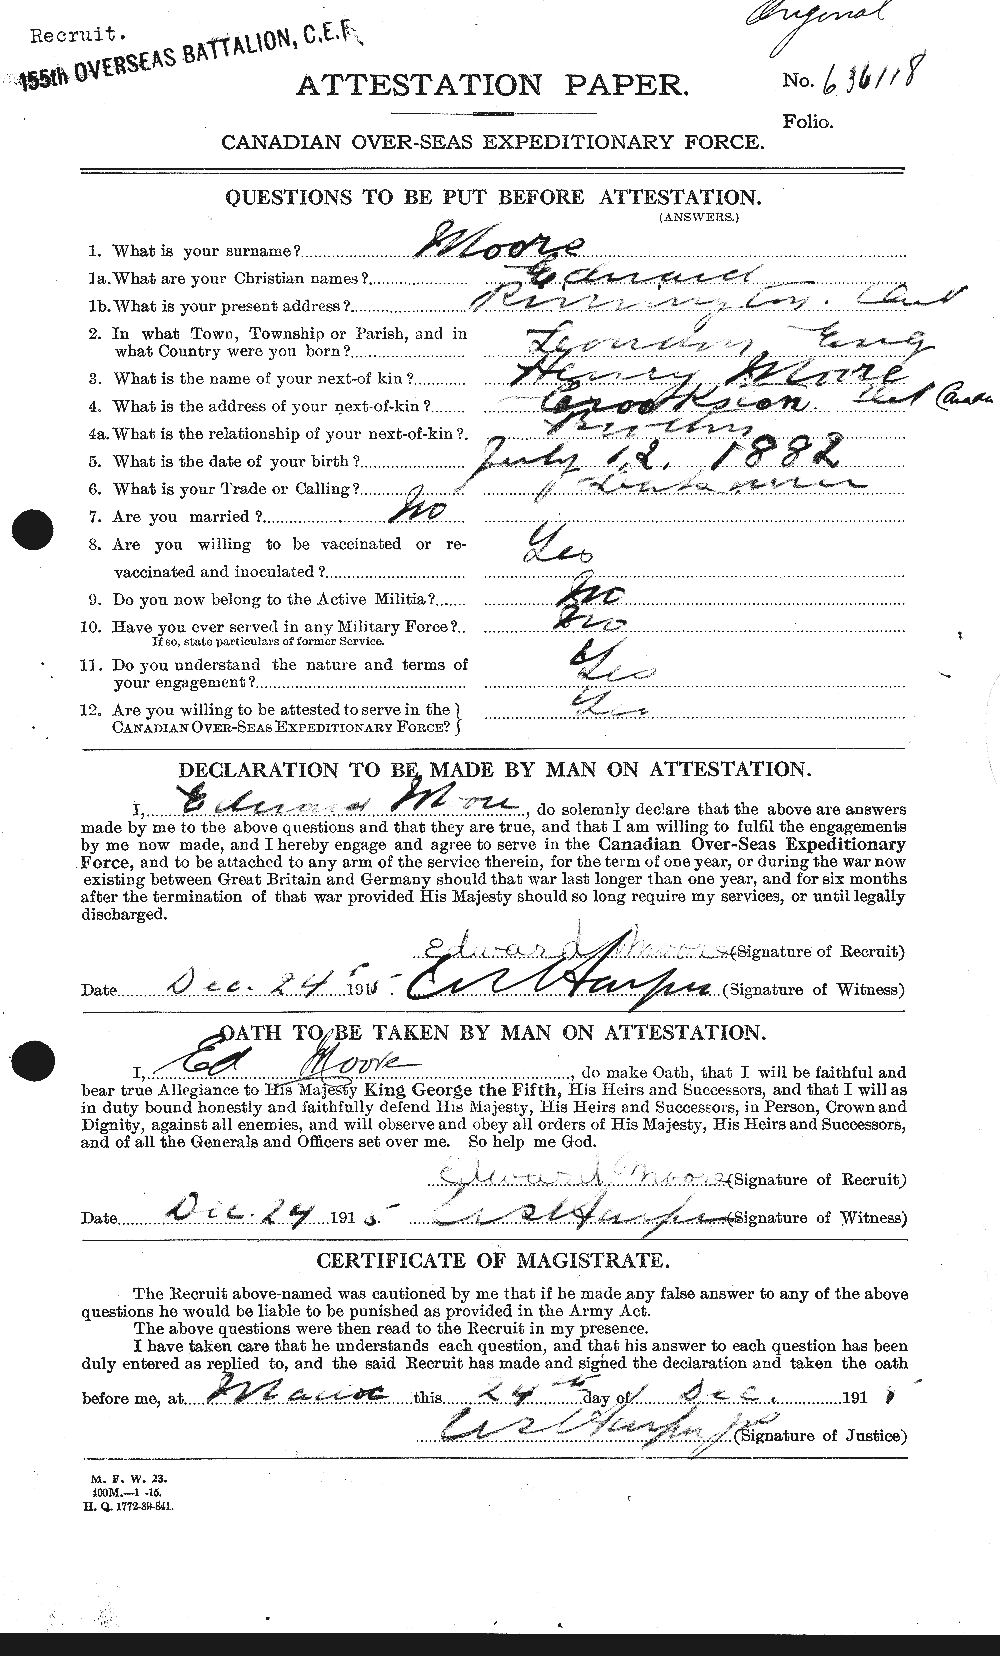 Personnel Records of the First World War - CEF 506613a